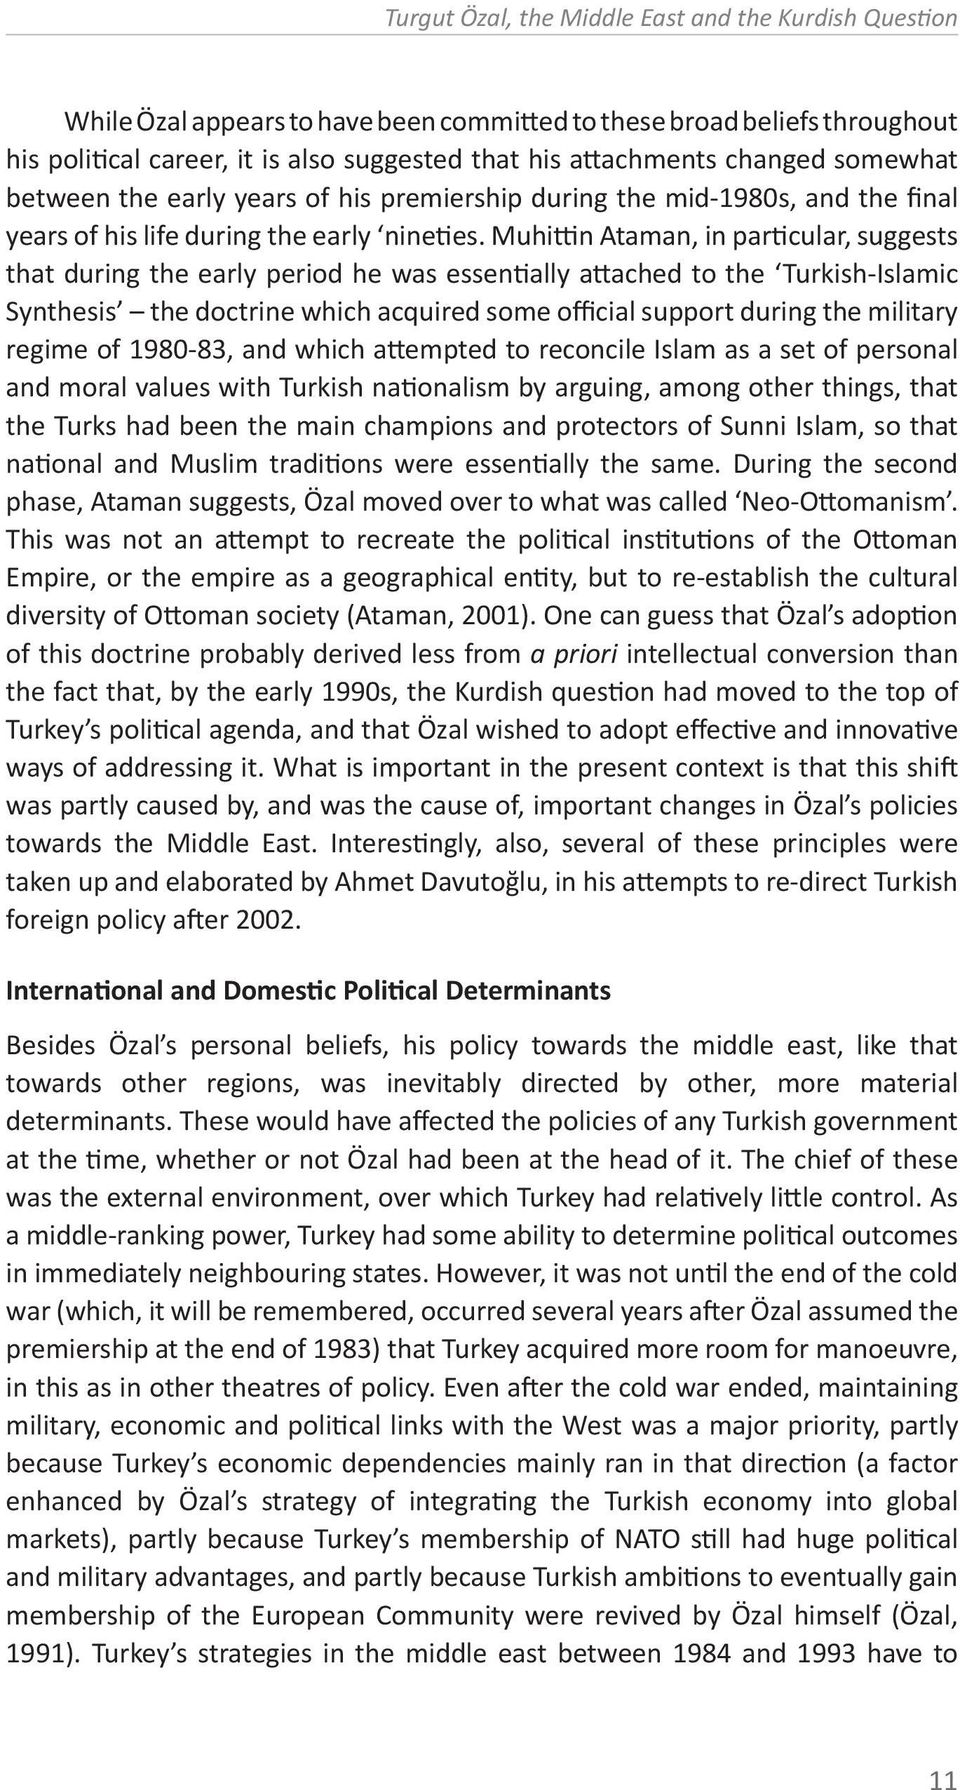 Muhittin Ataman, in particular, suggests that during the early period he was essentially attached to the Turkish-Islamic Synthesis the doctrine which acquired some official support during the